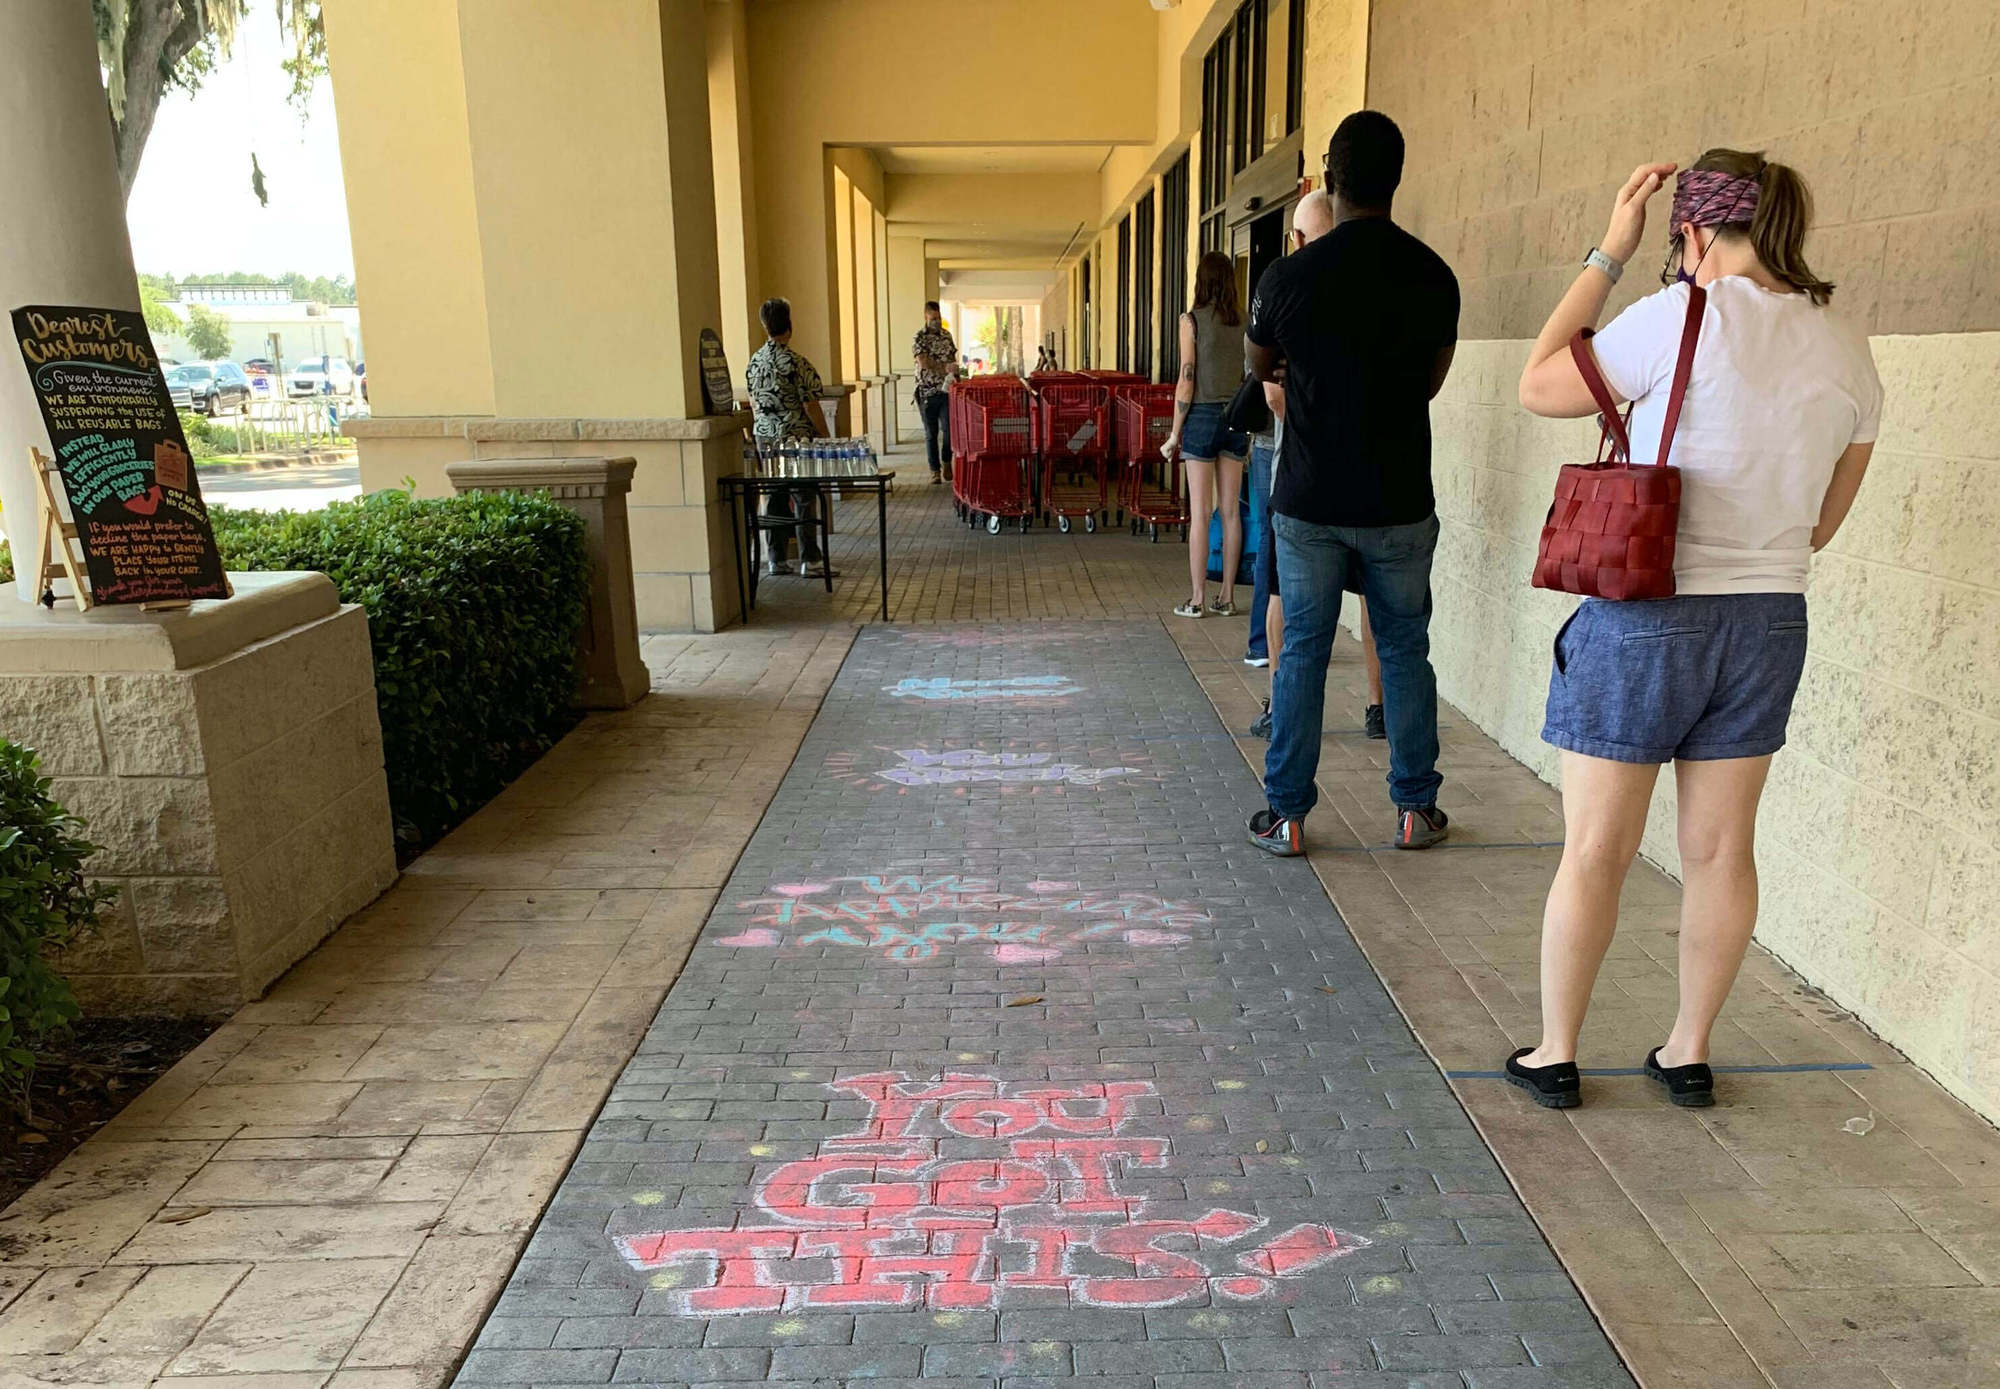 People wait in line to enter a Trader Joe's in Gainesville, Florida. September 2020